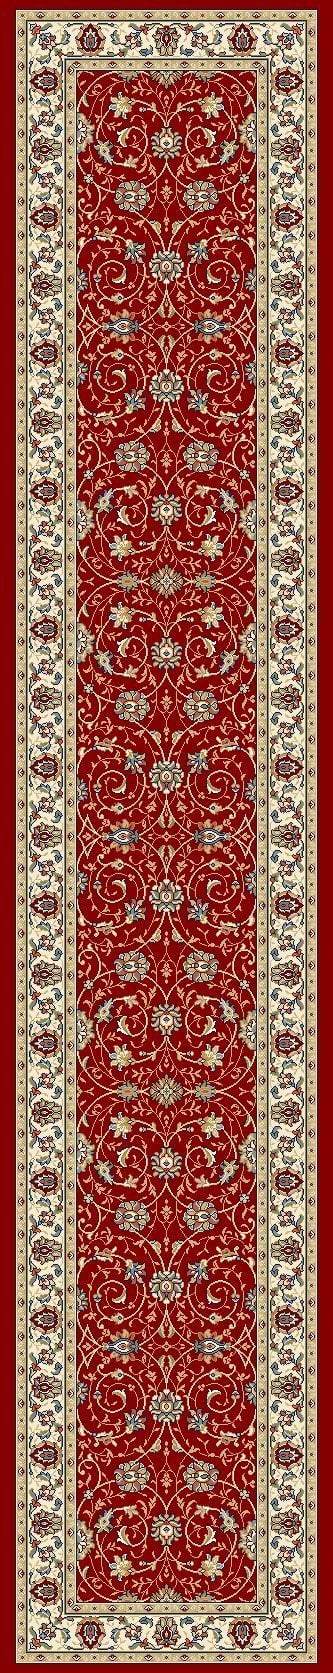 Dynamic Area Rugs 2 x 3.11 Ancient Garden Area Rugs 57120-1464 Red 100% Poly Belgium 13 Sizes